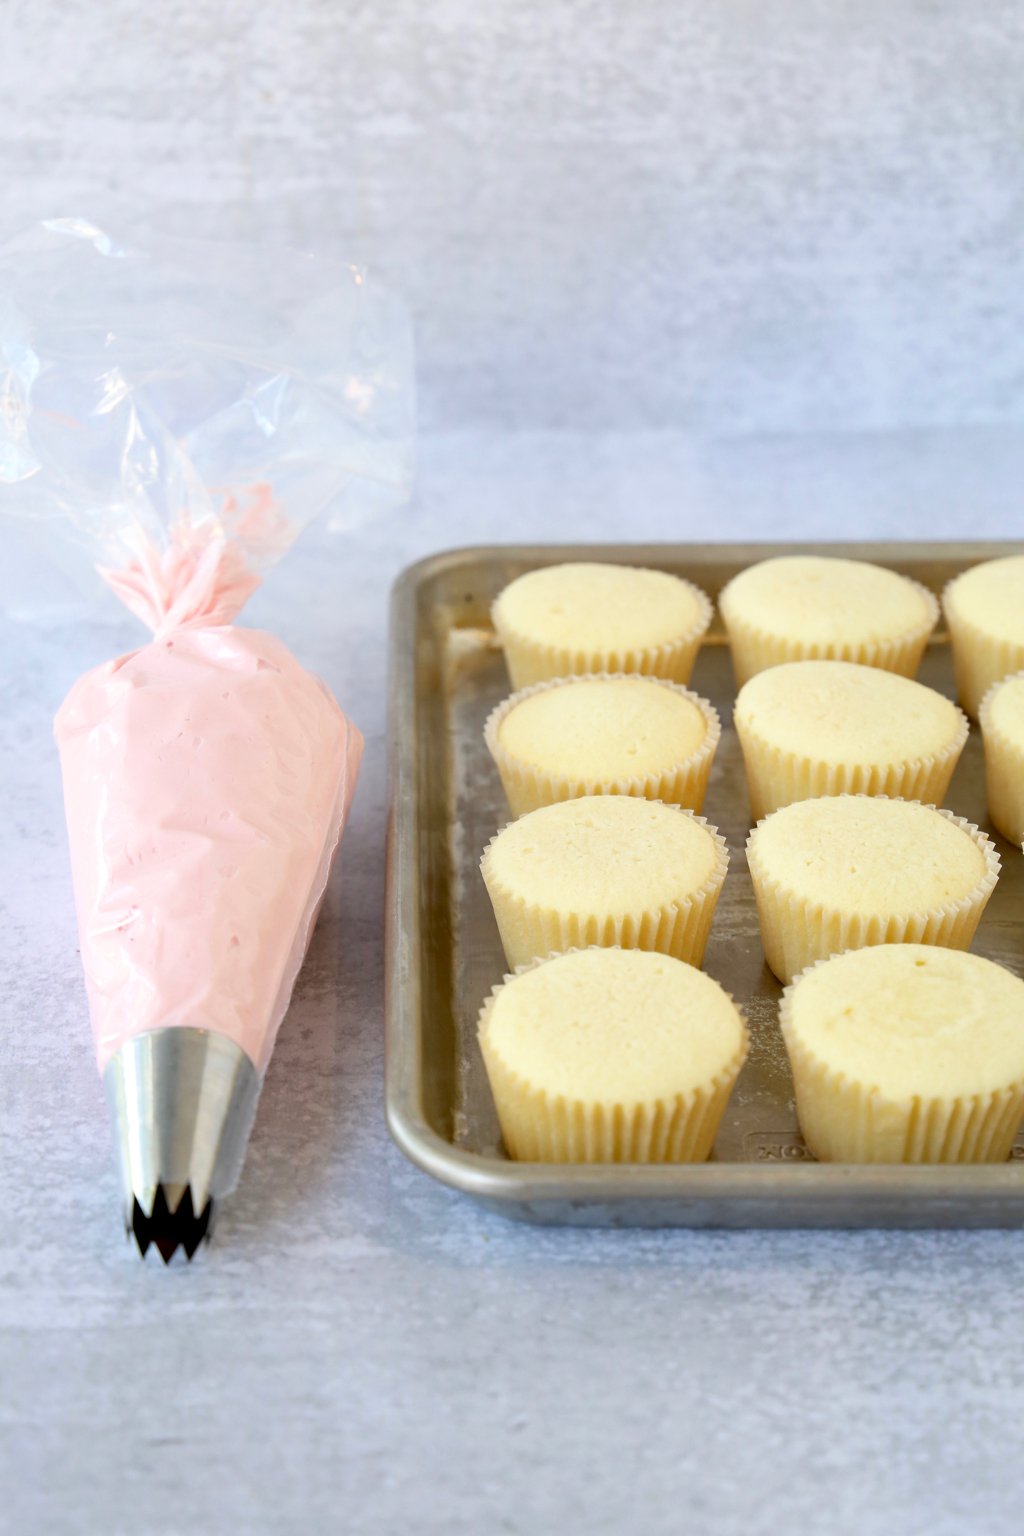 A baking sheet lined with cupcakes and a piping bag filled with pink frosting sitting next to it.  